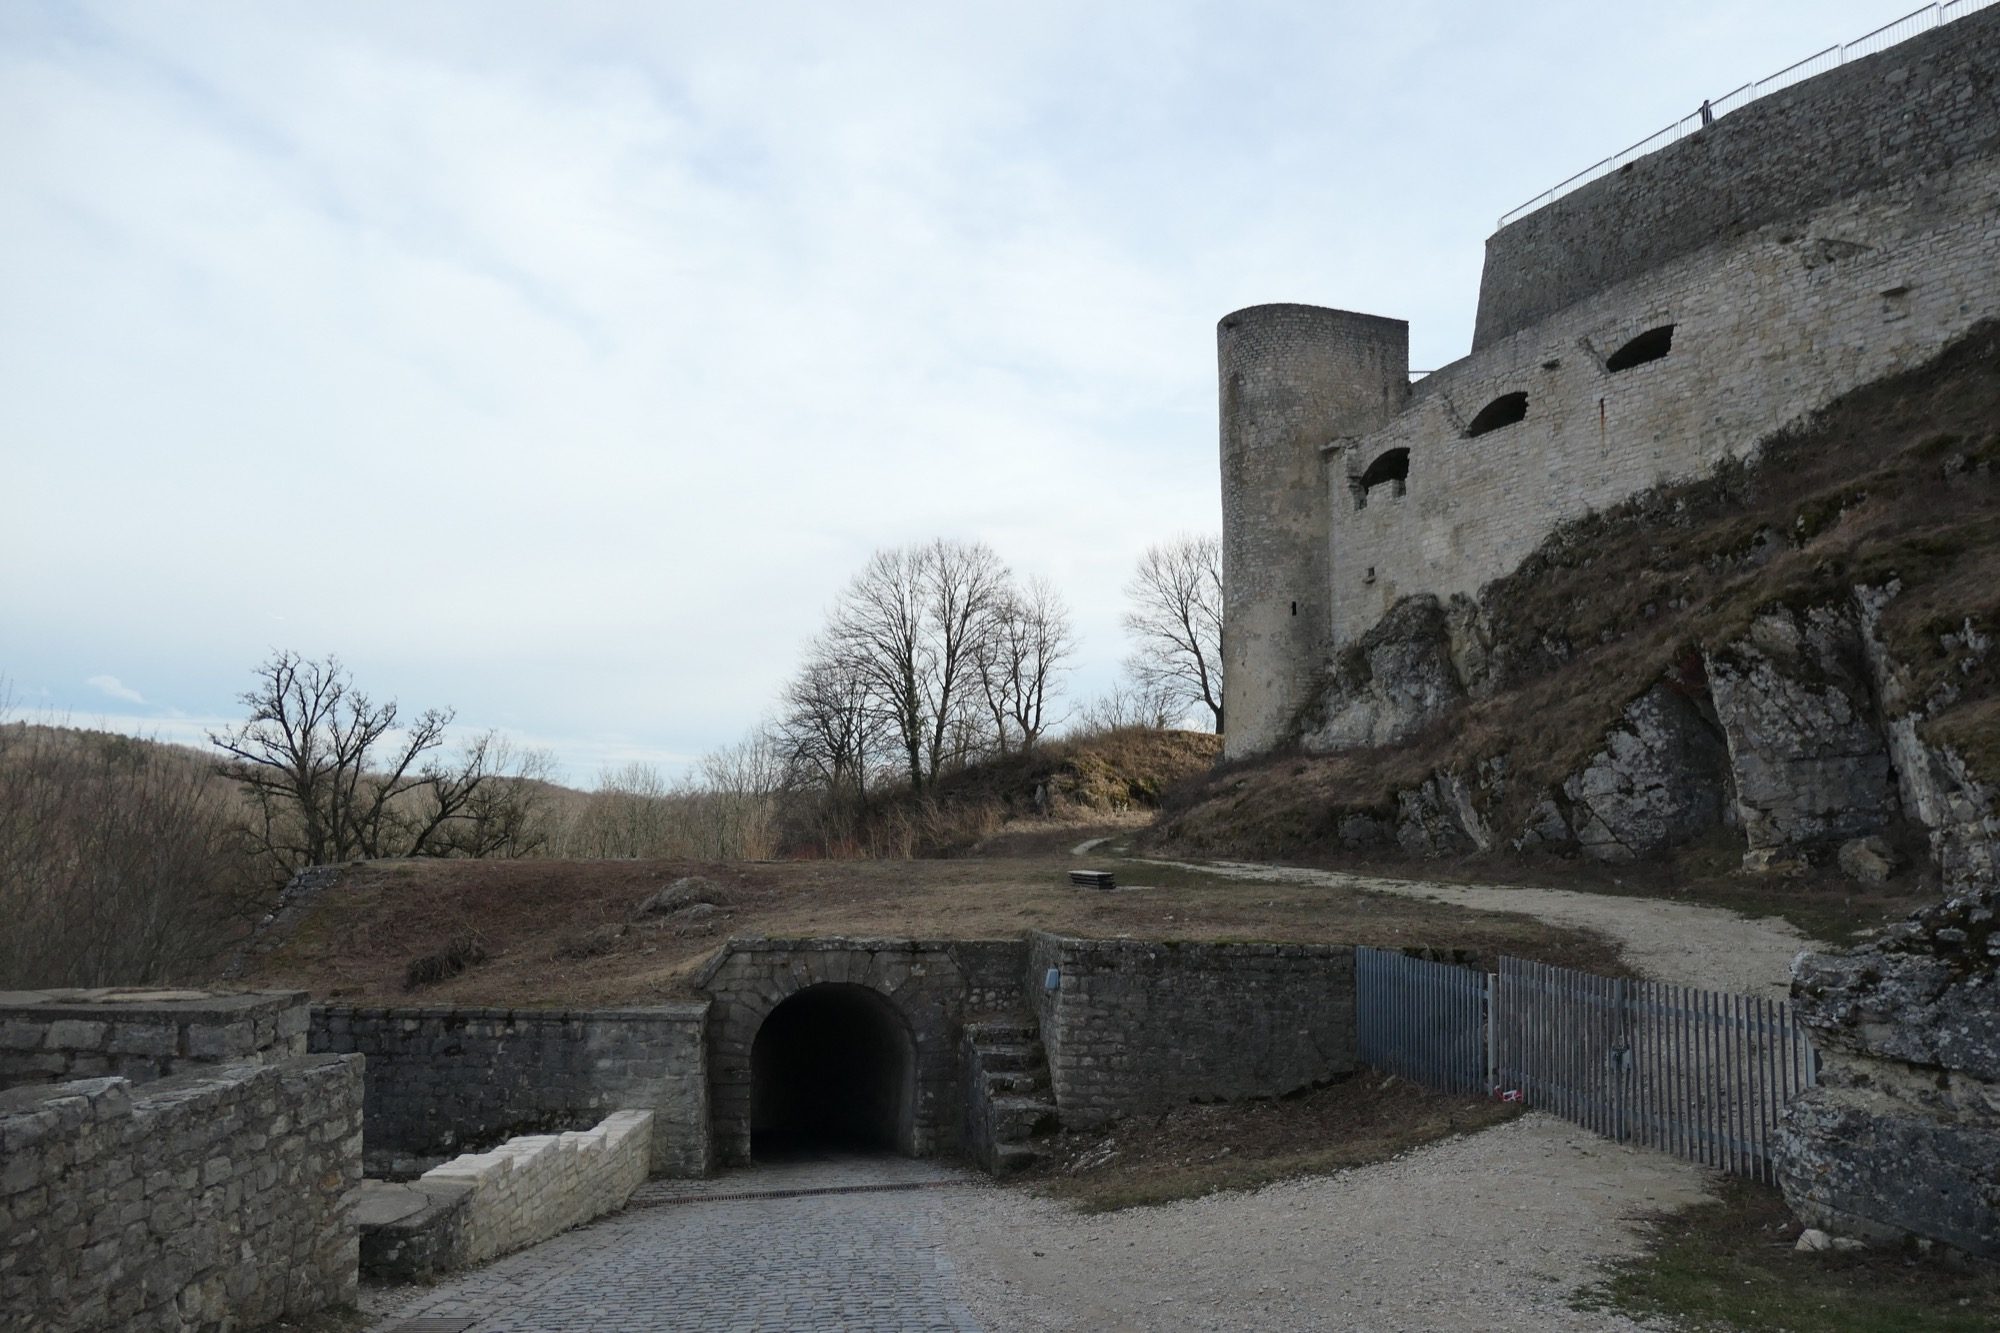 Entrance tunnel to Castle Hohenneuffen.